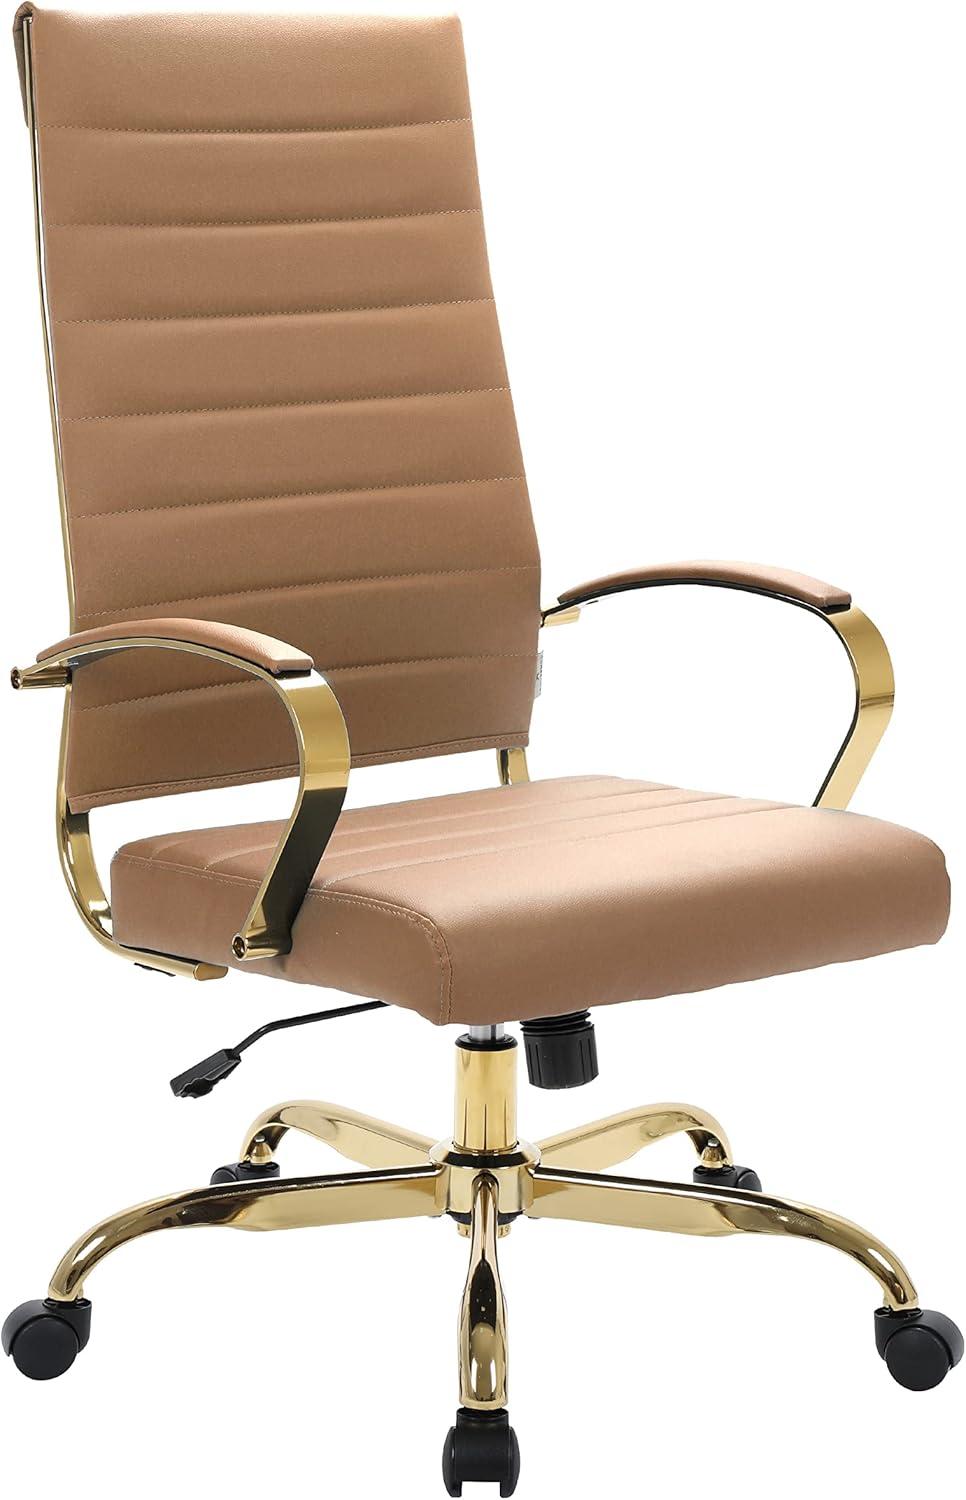 Mid-Century Modern High-Back Swivel Office Chair in Polished Brown Leather